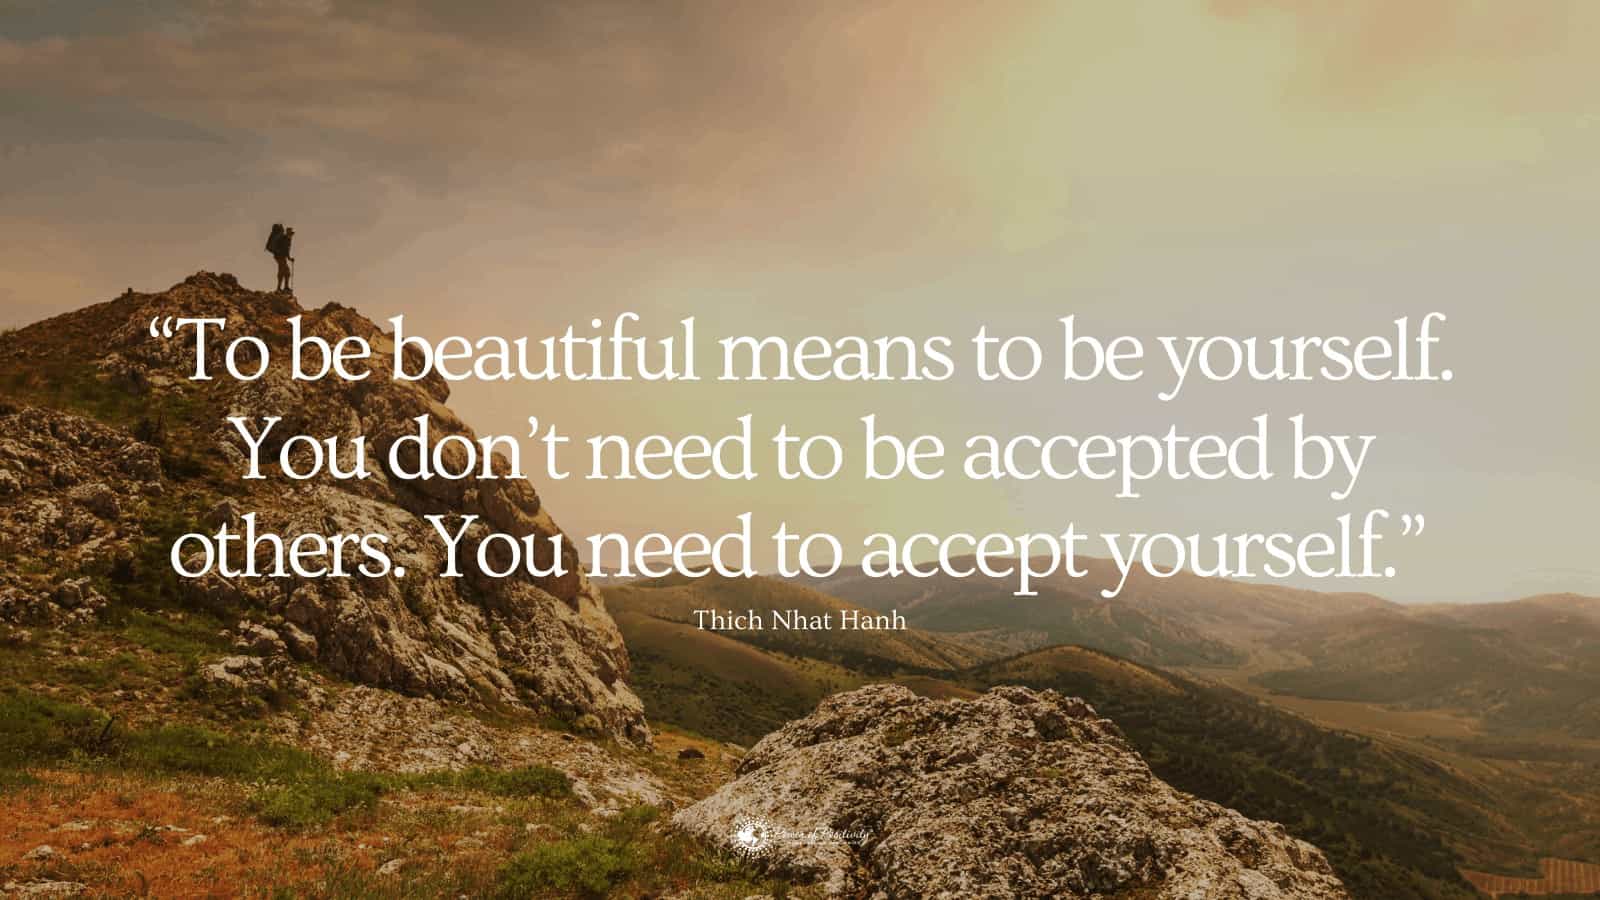 15 Quotes on Loving Yourself (Because You Deserve It!)